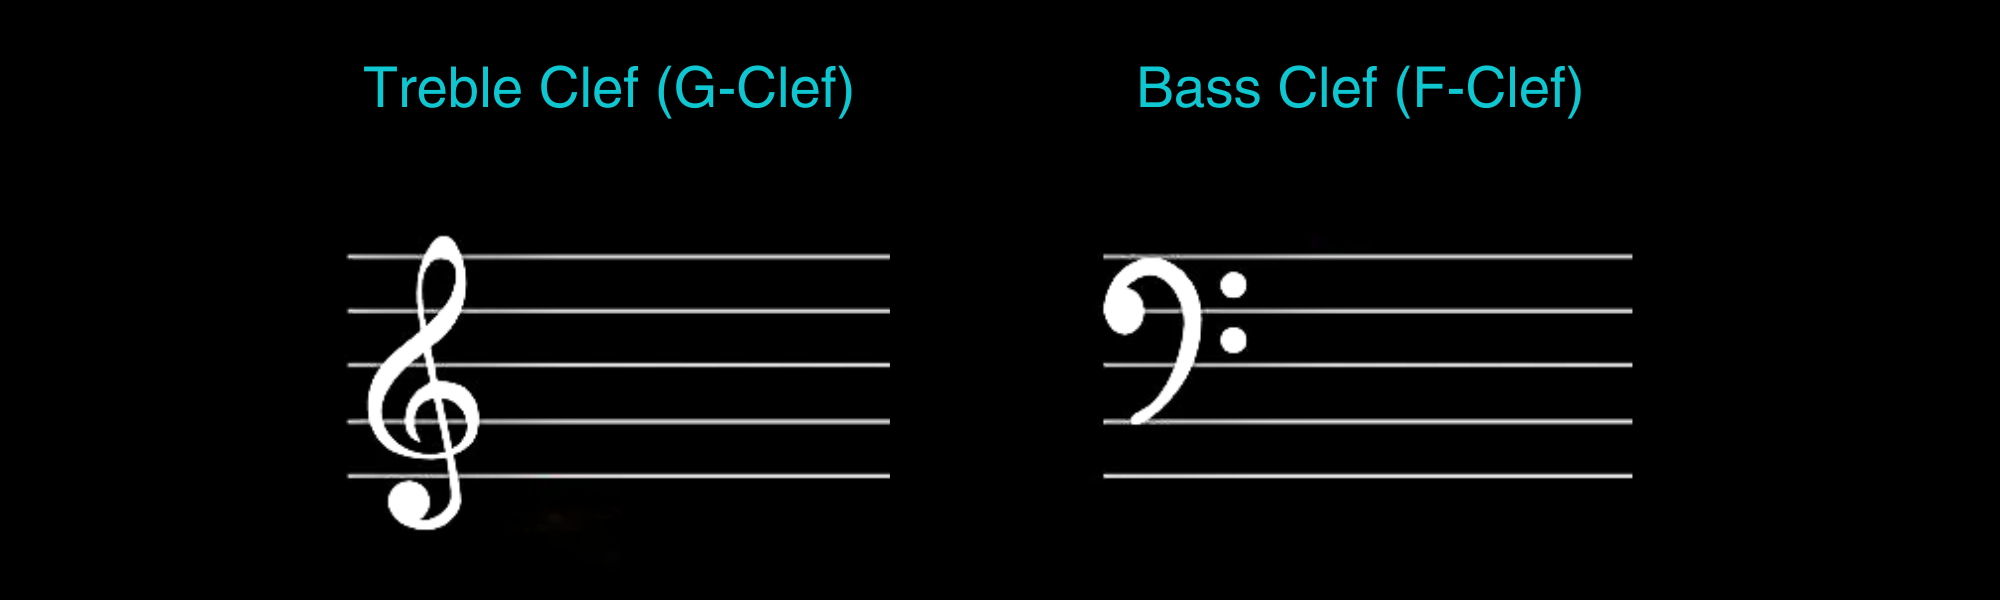 Treble clef (G-clef) and bass clef (F-clef).